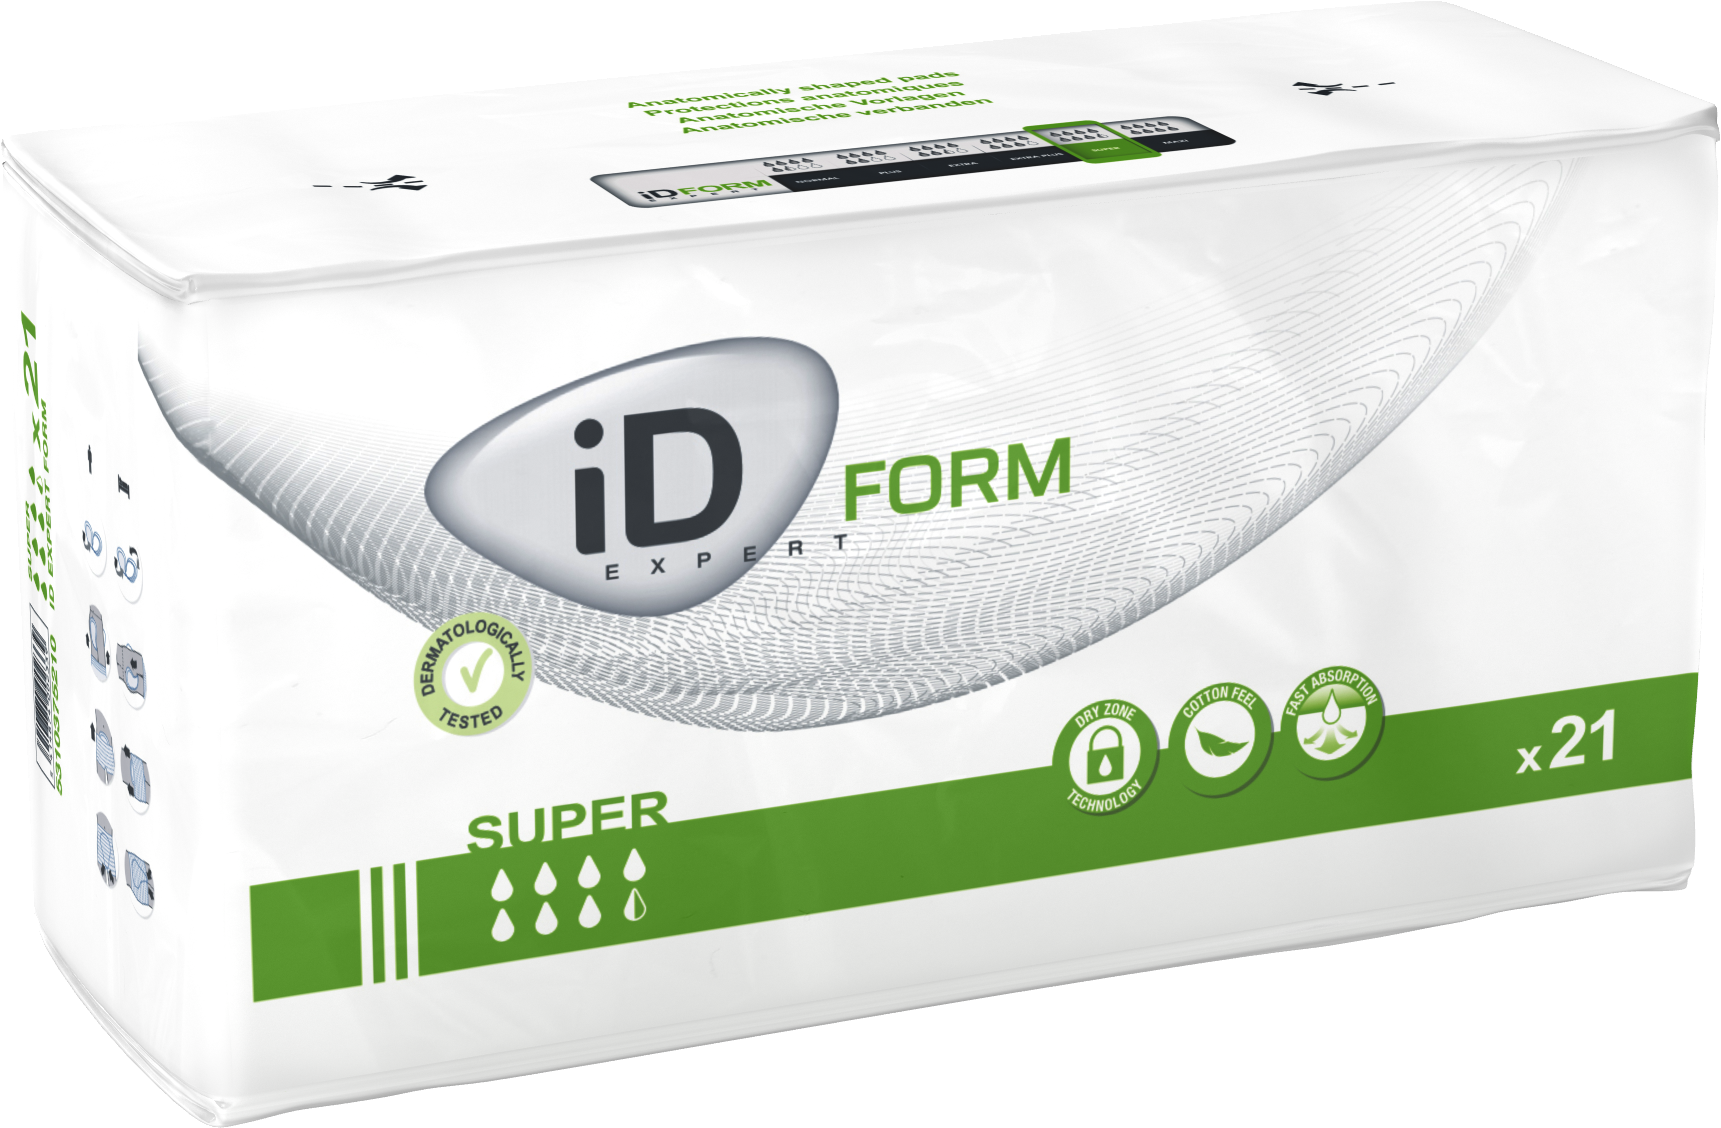 ID 5310375210 CS/4 (21/PKG) ID FORM SUPER SHAPED PADS, 2 PIECE SYSTEM, SIZE 3, 3200 ML ABSORBENCY 